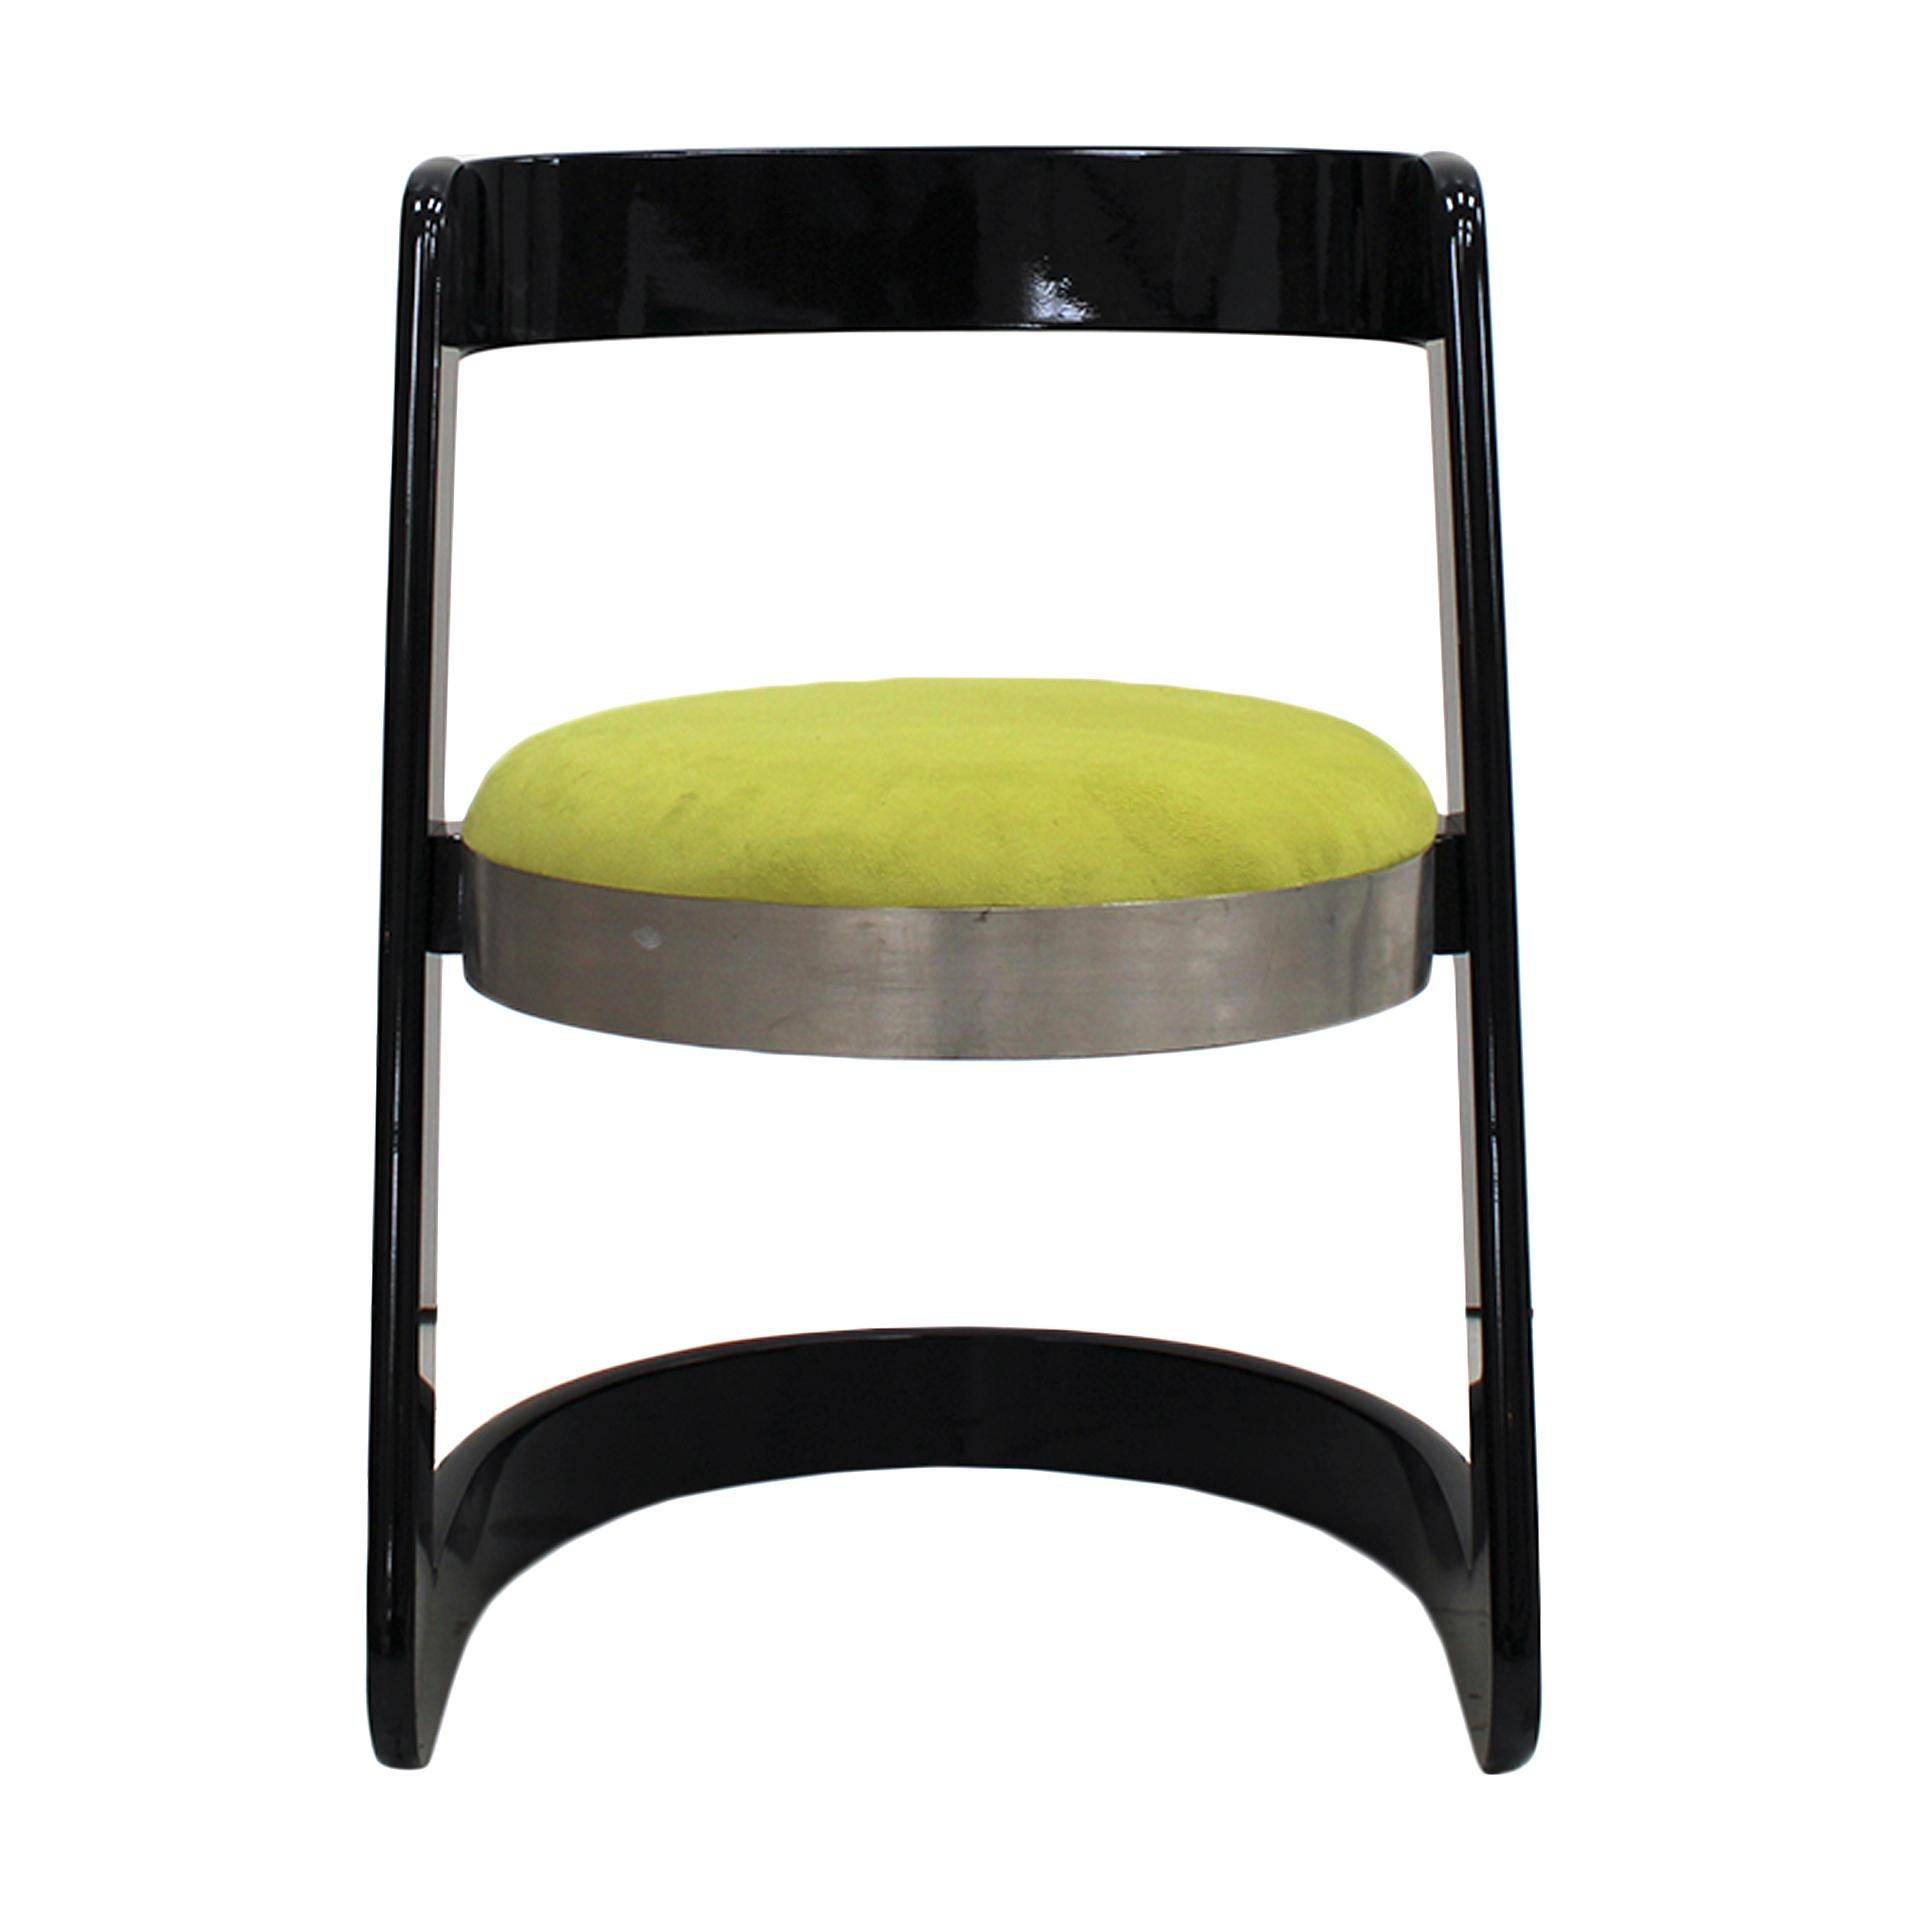 Mid Century modern set of eight Italian dinning chairs designed in style of Willy Rizzo for Mario Sabot. Made of black lacquered wood structure. Seat reupholstered in green cotton velvet with polished steel frame, Italy, 1970s.

These Italian dinnig